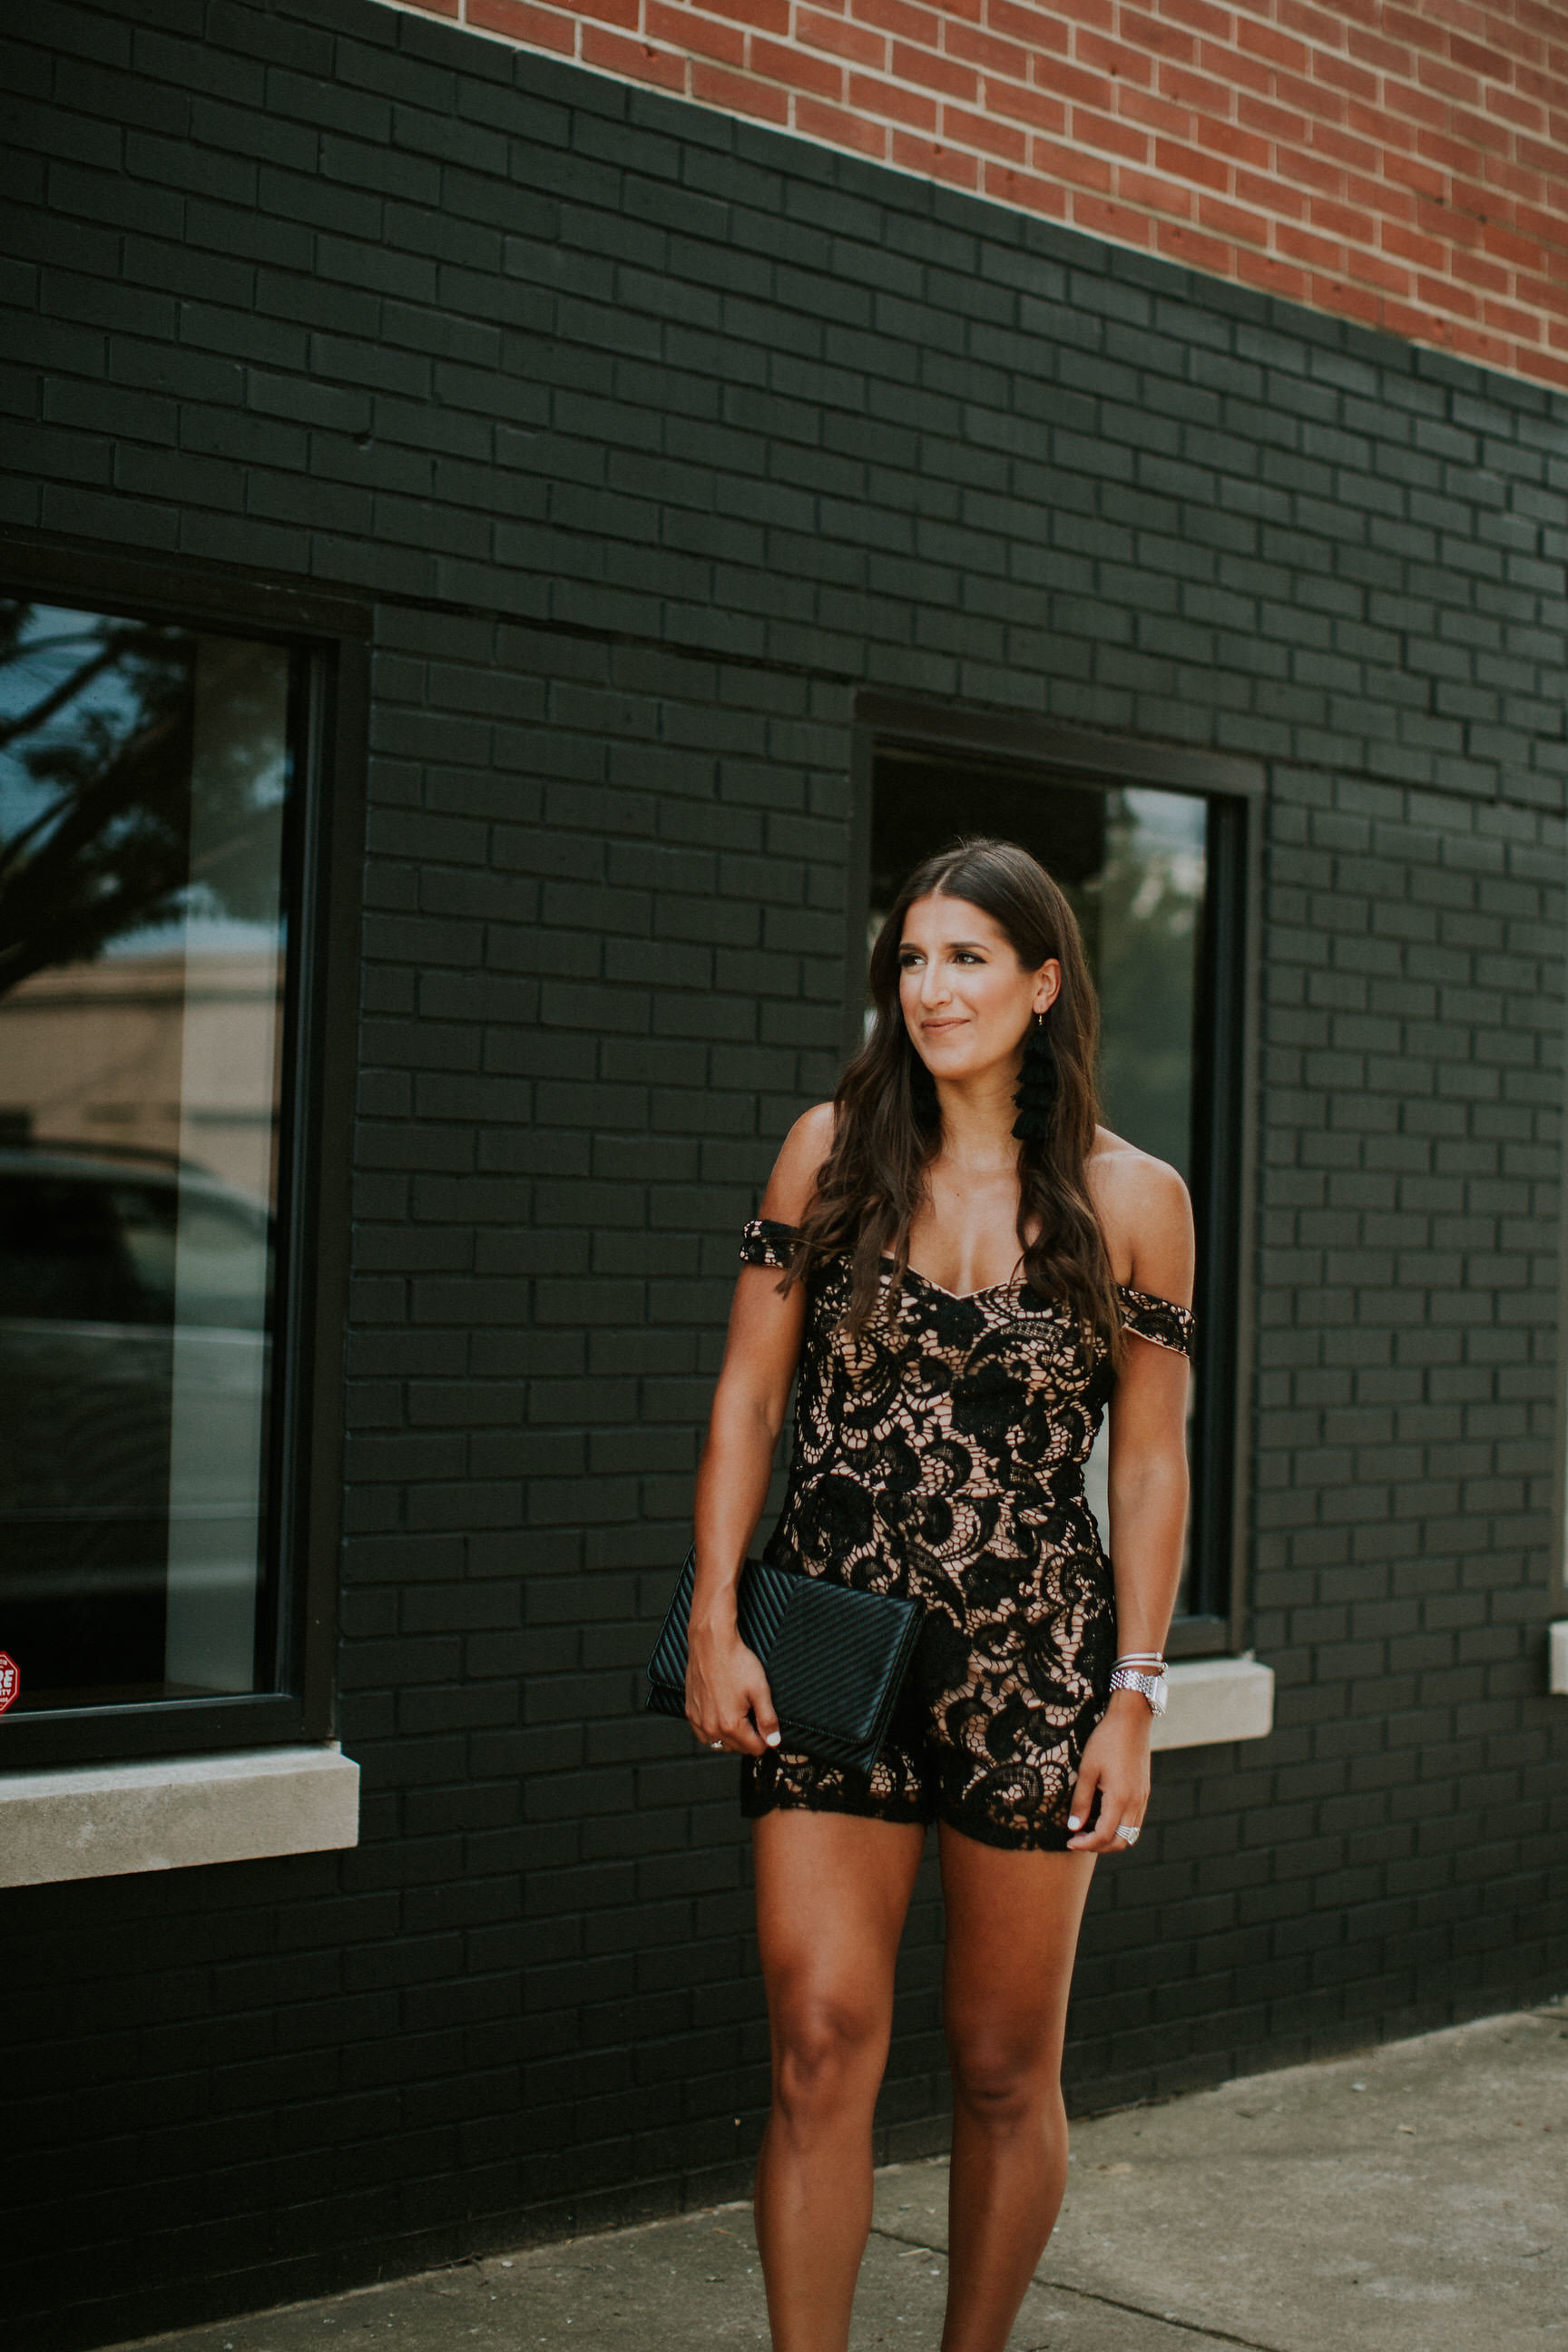 weekend style, tassel outfit, tassel coordinates set, tassel romper, tassel set, nasty gal outfits, nastygal outfits, lace romper, off the shoulder romper, off the shoulder lace romper, black mesh maxi dress, black mesh gown, summer weekend style, summer style, summer fashion // grace wainwright a southern drawl